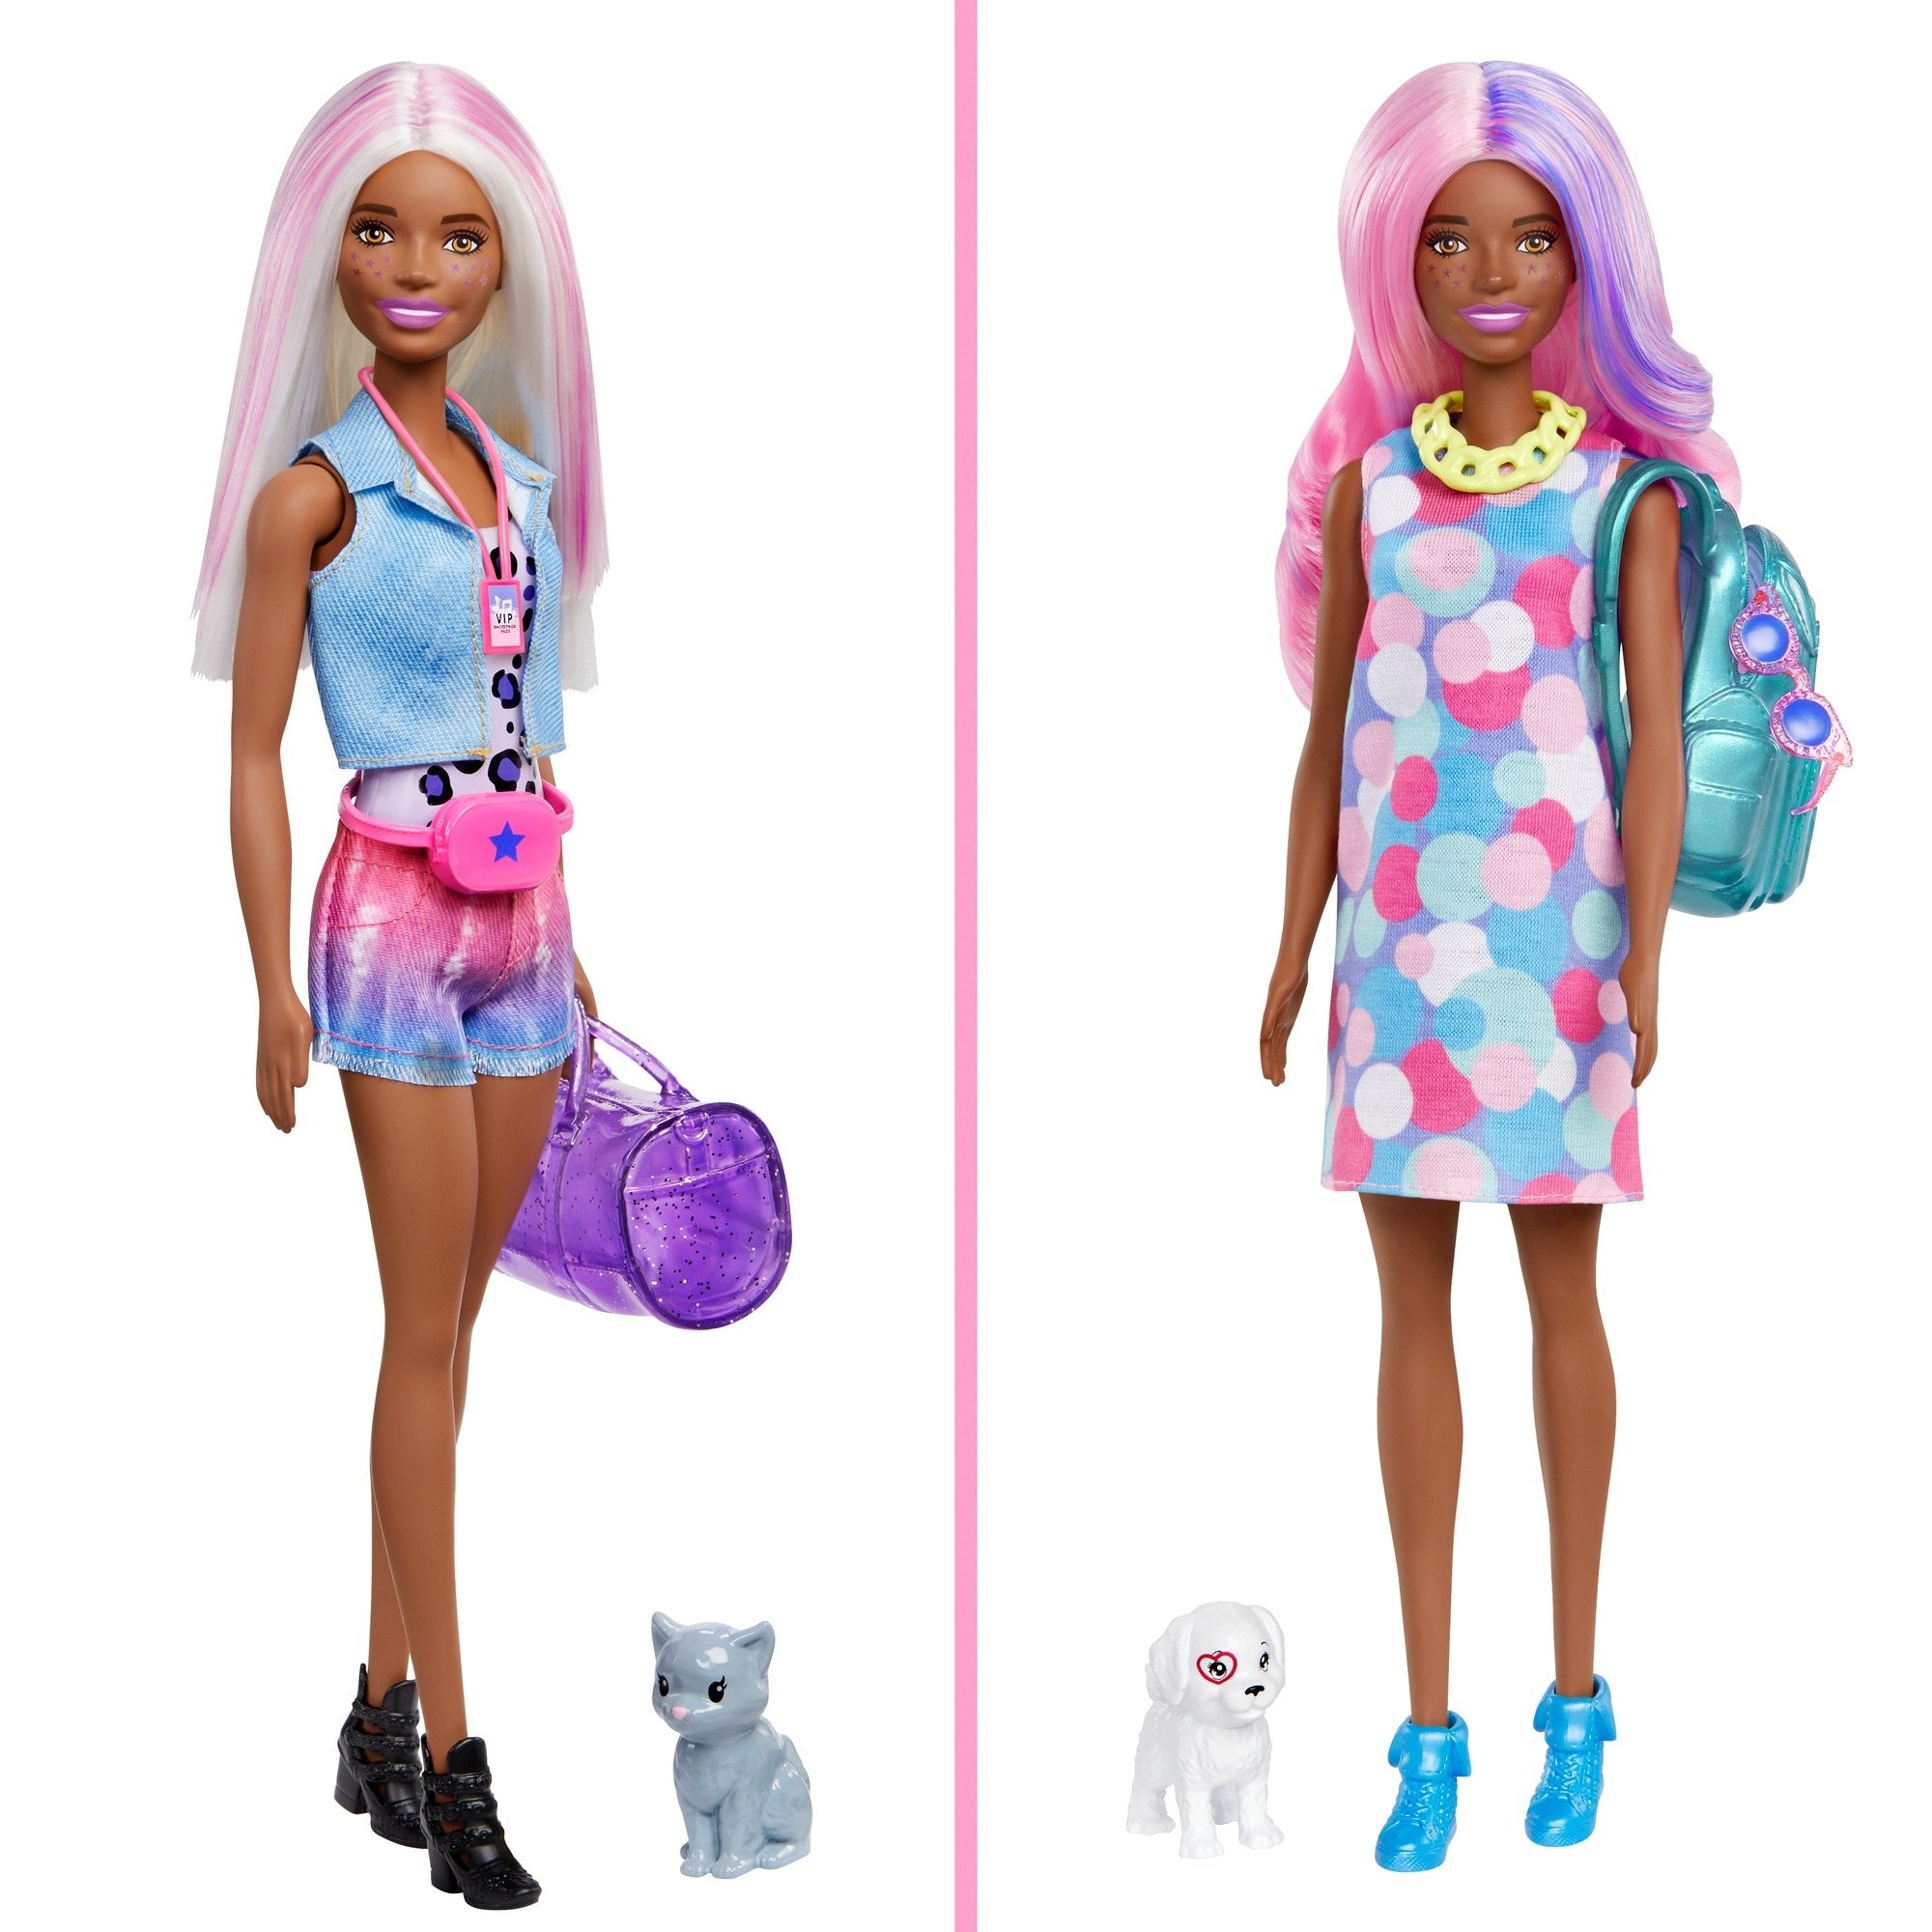 Barbie GPD57 Ultimate Color Reveal Carnival to Concert Fashion Doll for sale online